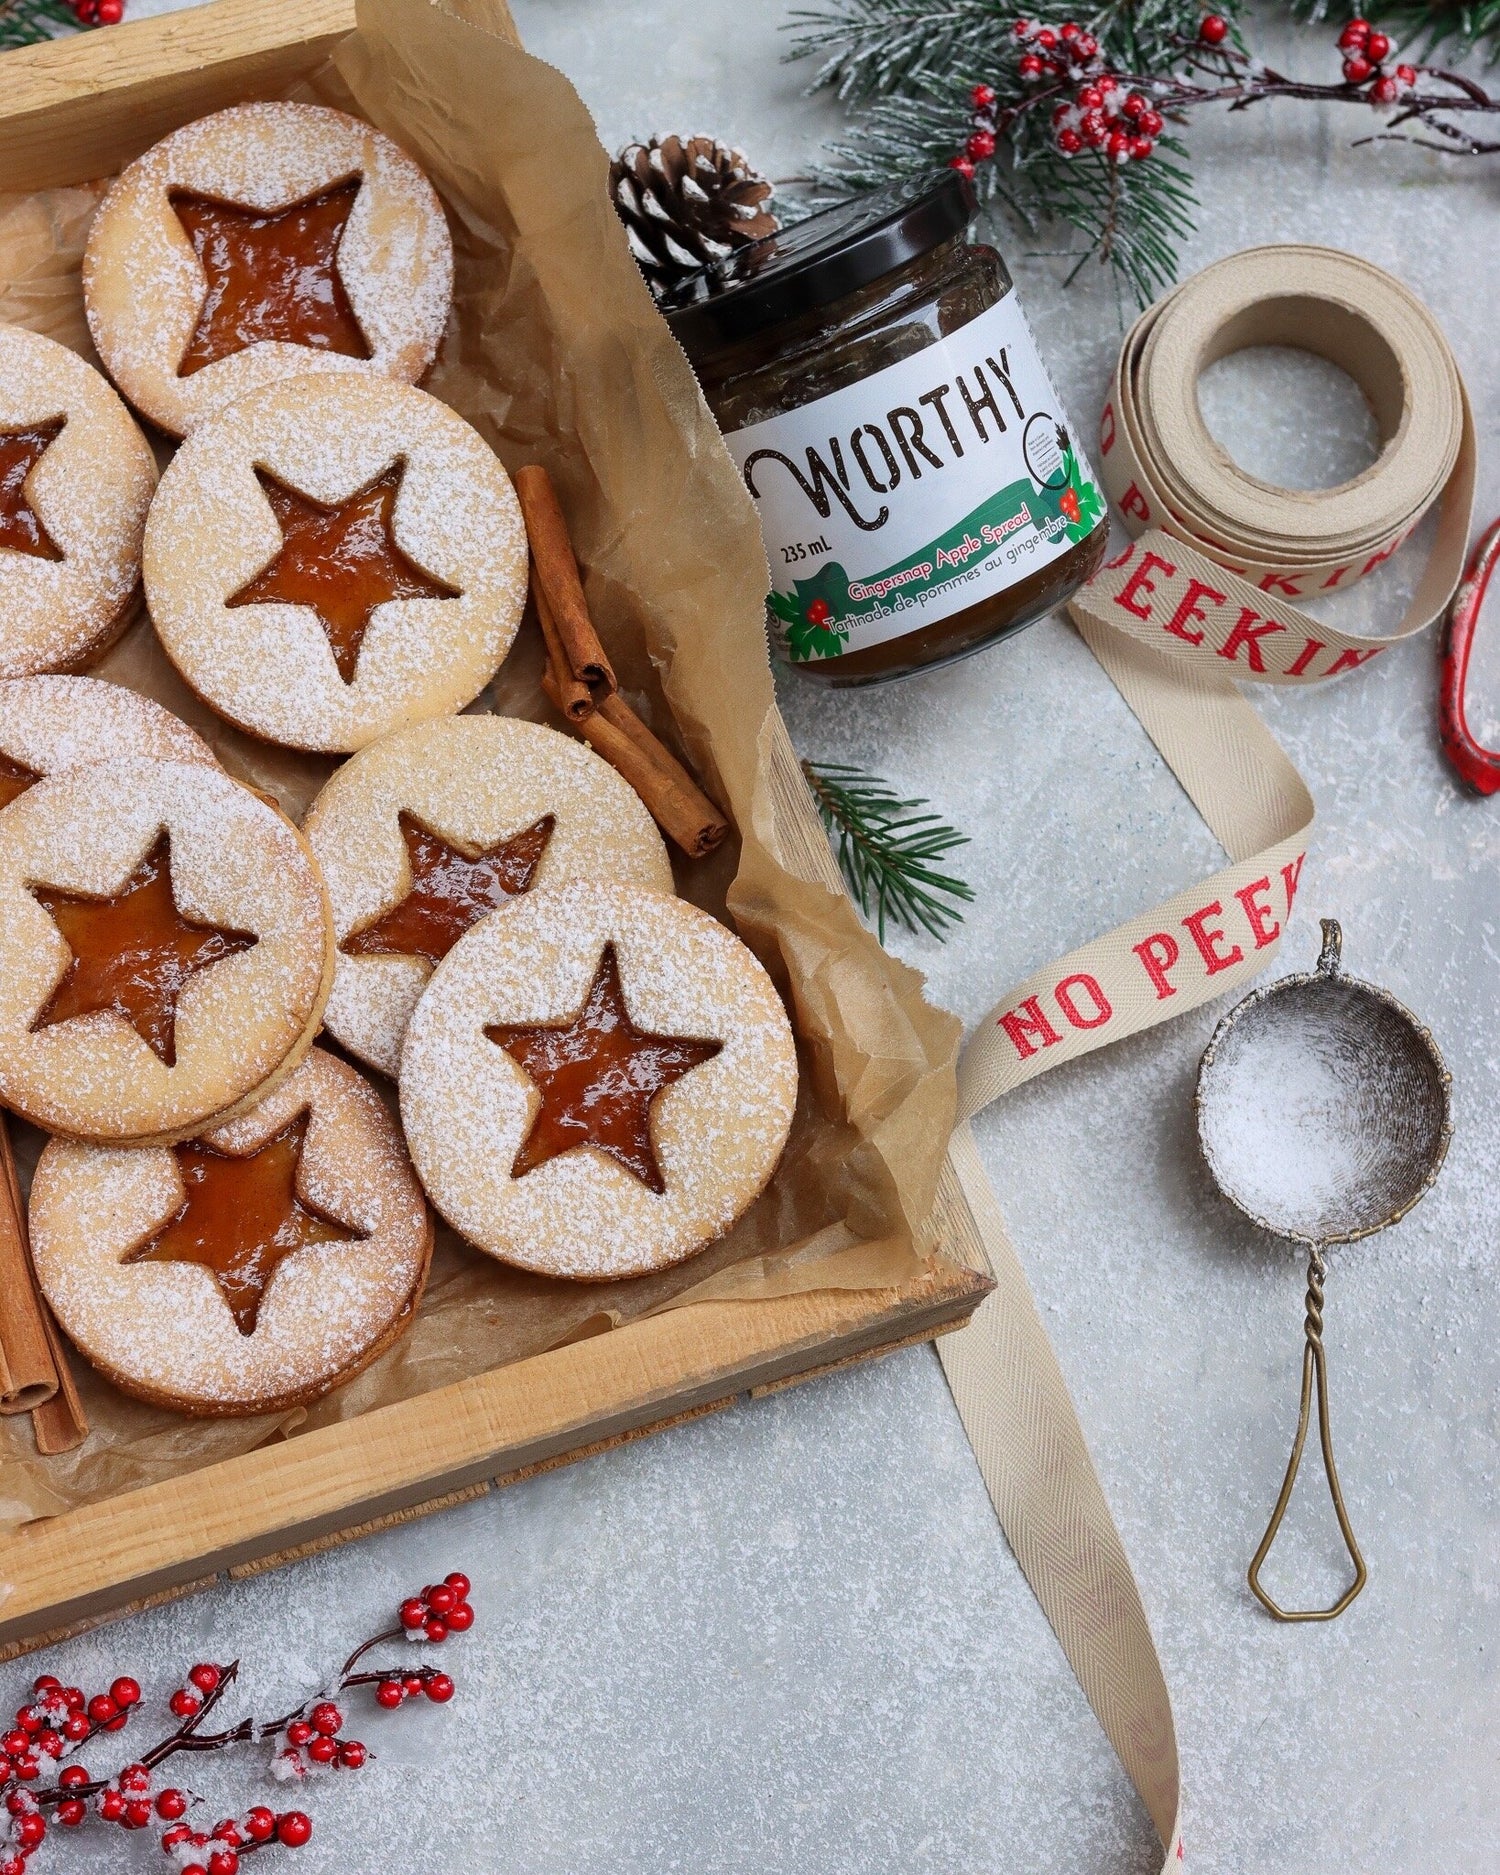 Linzer cookies with a star shaped window revealing filling, made with Worthy's Gingersnap Apple Spread, dusted with powdered sugar in a Christmas setting. 